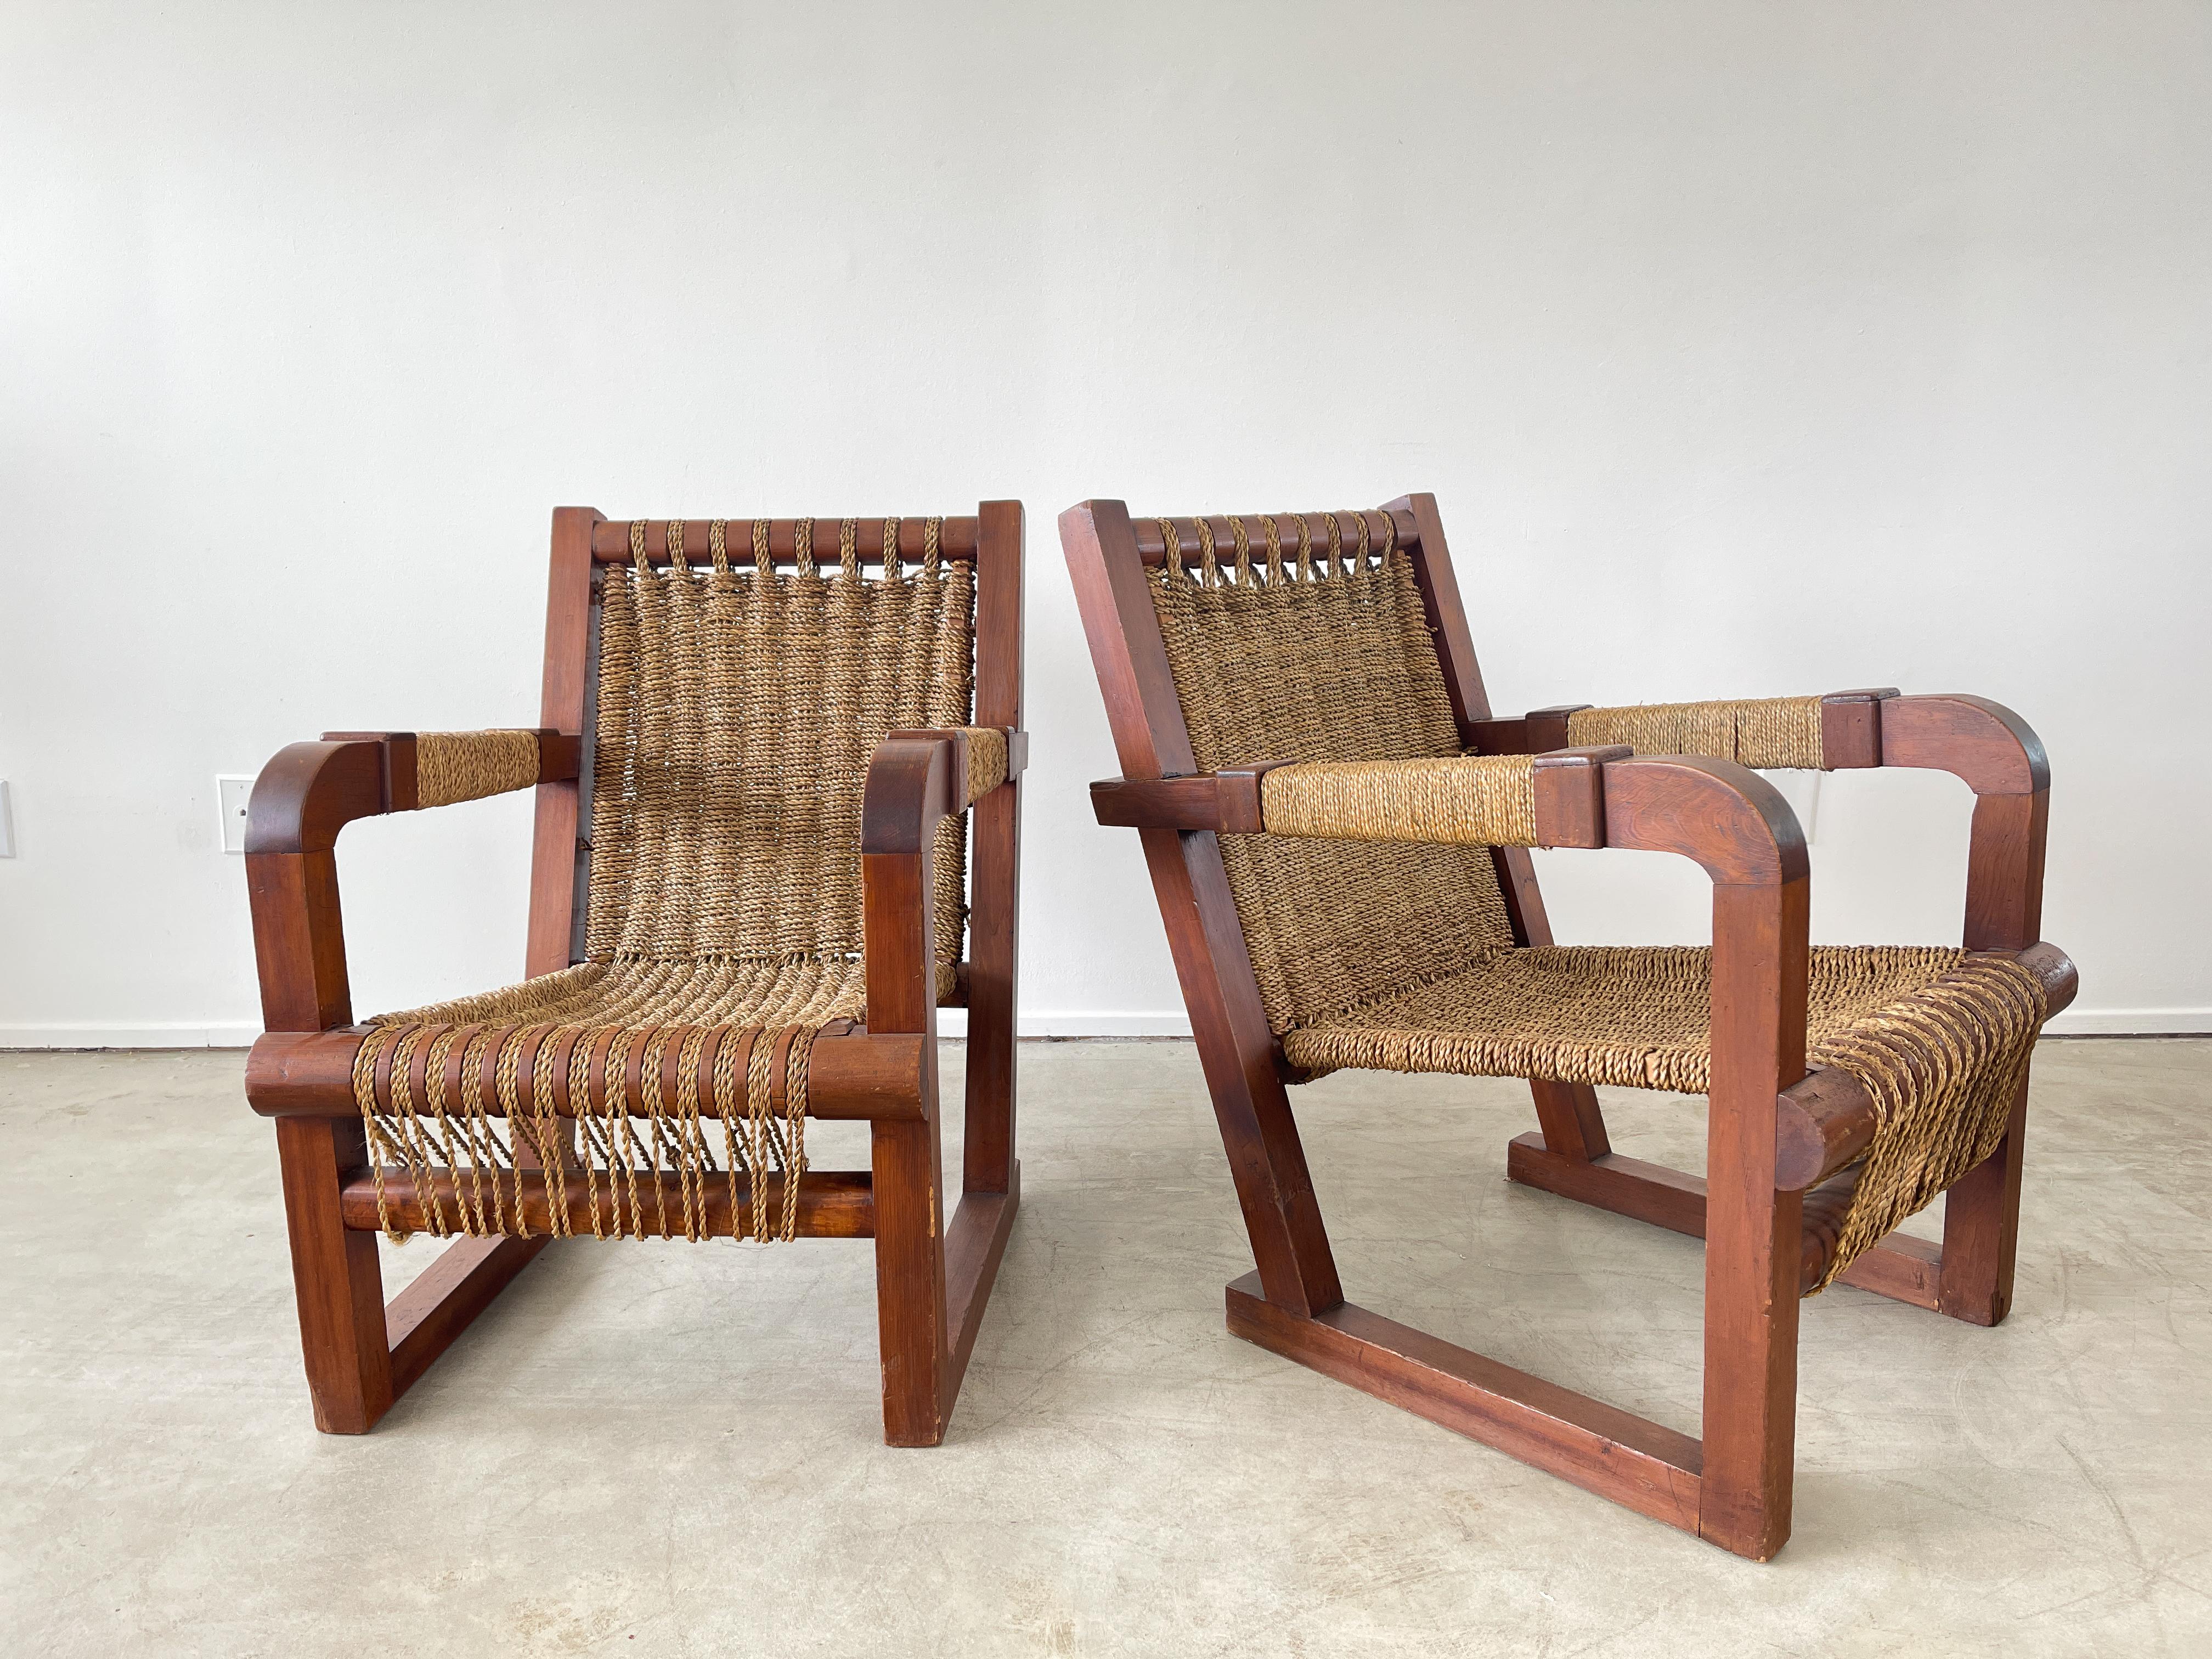 Pair of Francis Jourdain attributed chairs with incredible woven rope seats, back and arms. 
Bentwood armed detailing on oak frames. 
Great from ever angle with wonderful patina.